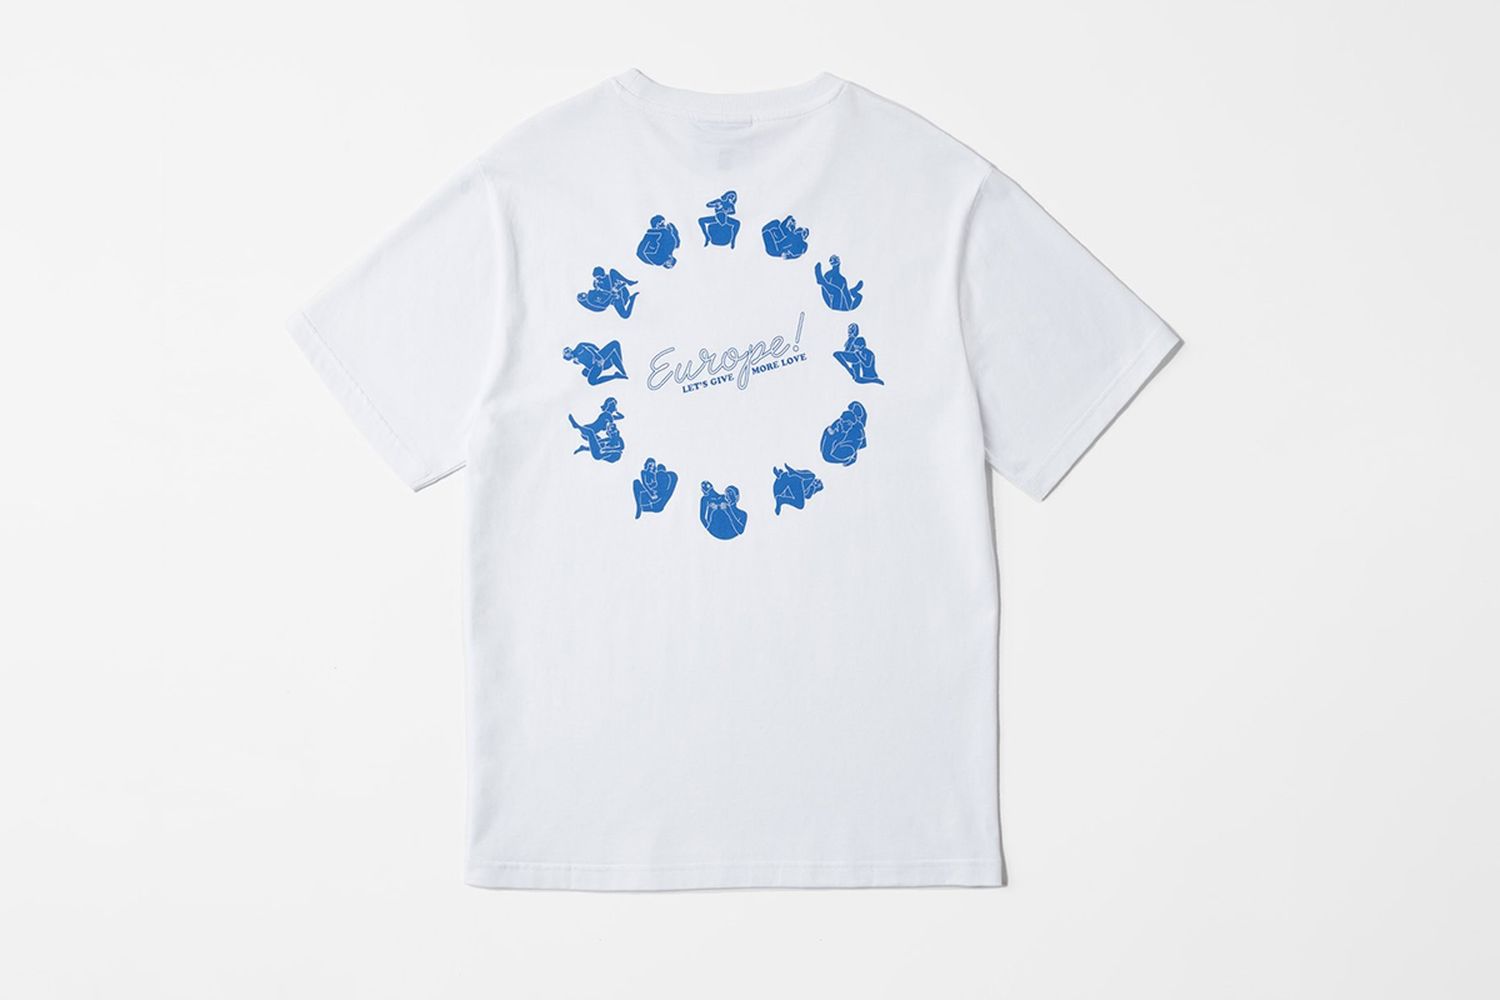 Let's Give More Love T-Shirt